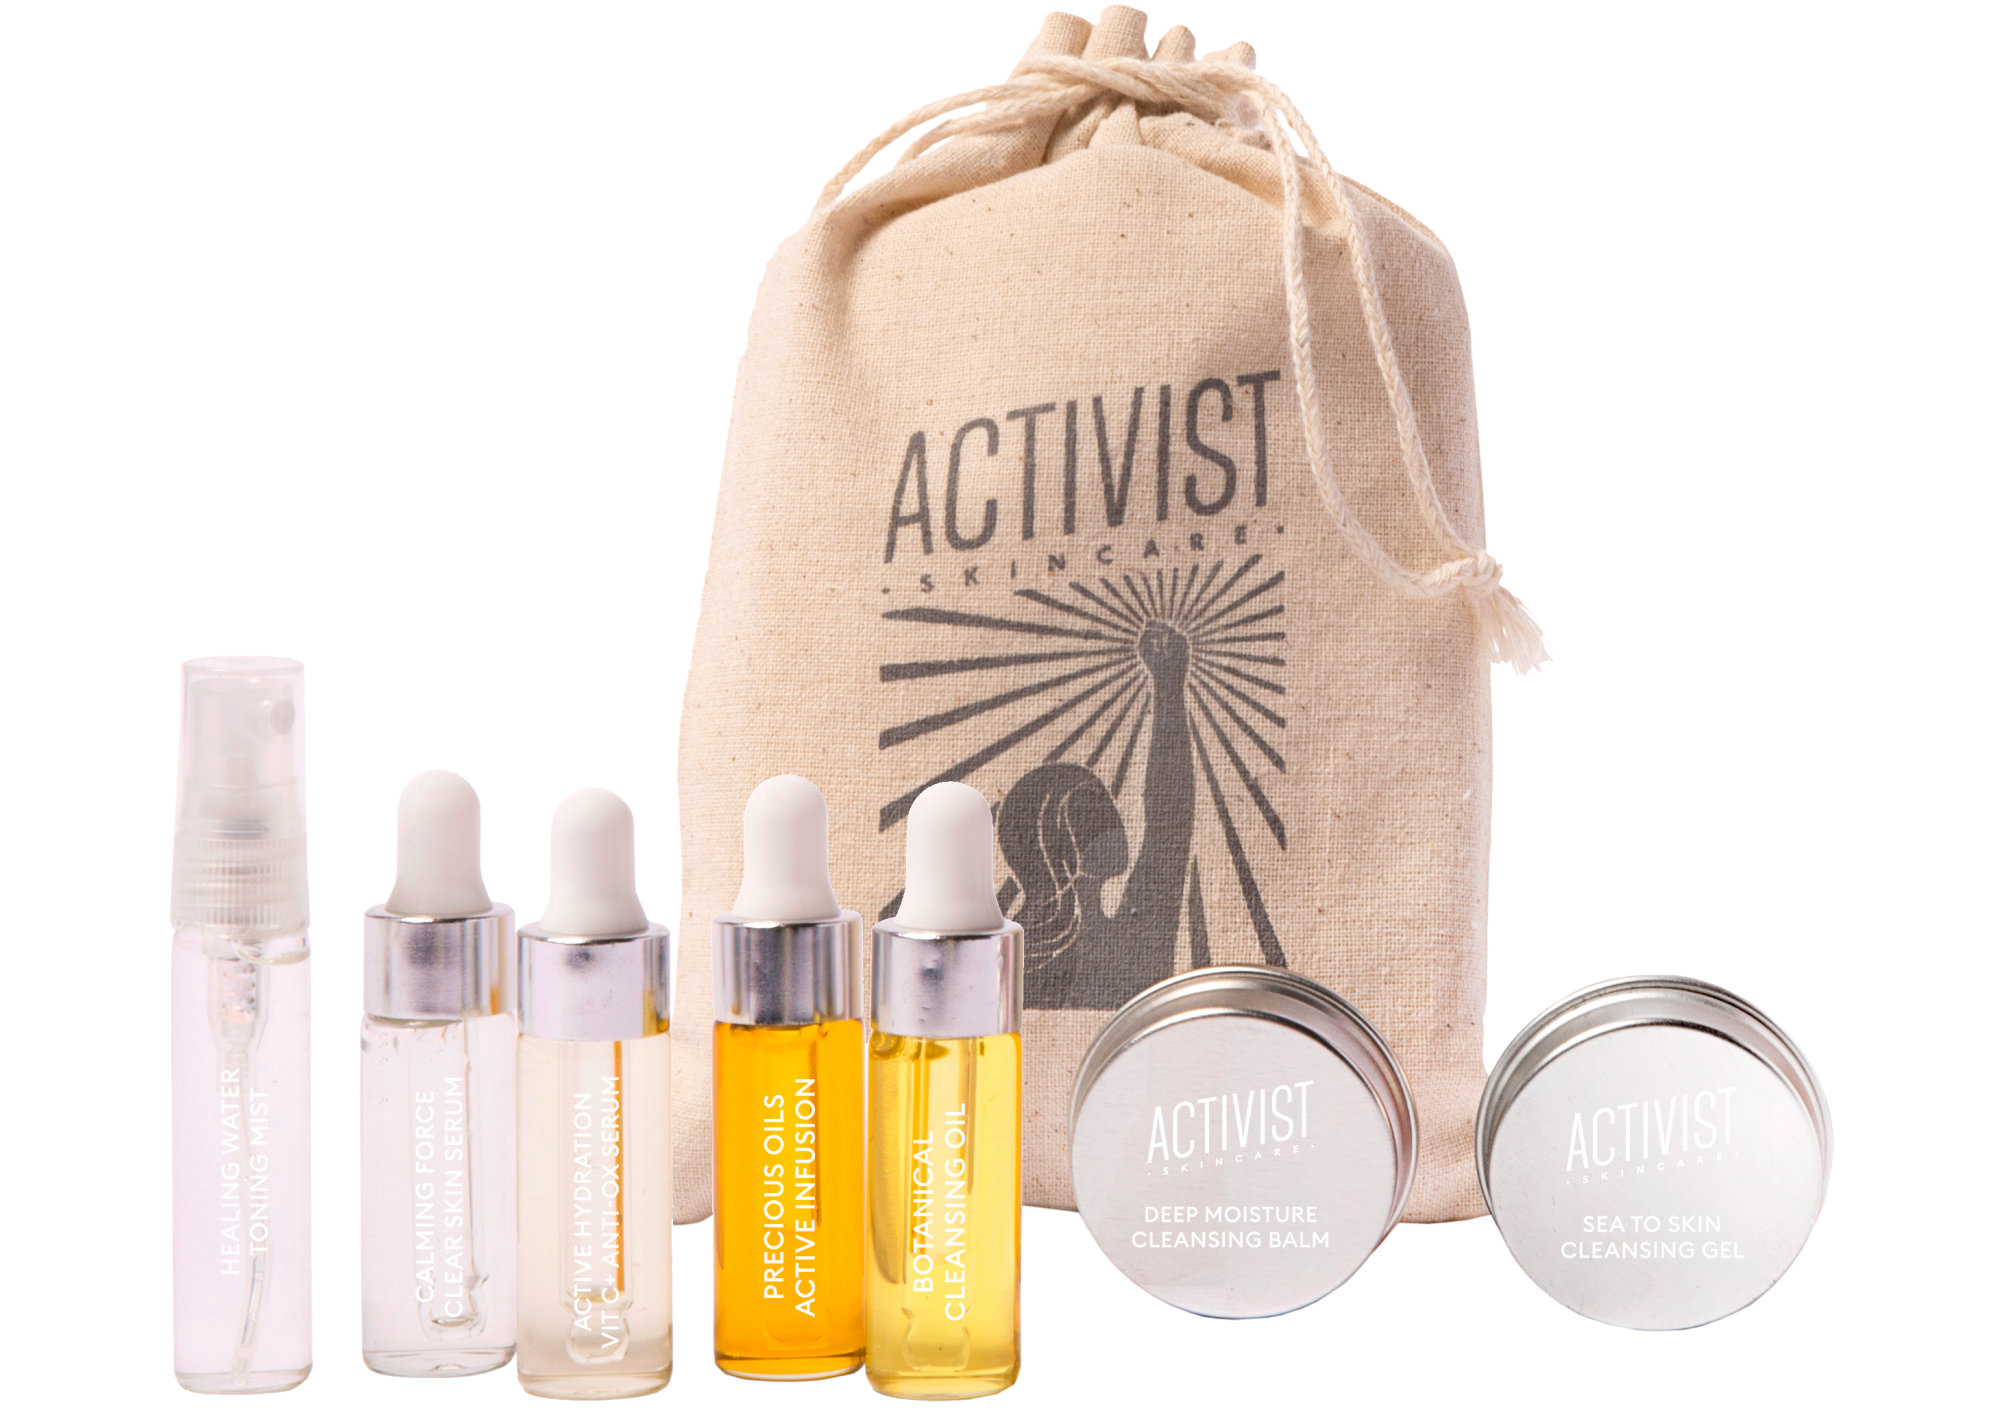 Activist Skincare trial kit features three cleansers, a hydrating toning mist, two serums and face oil with a drawstring bag